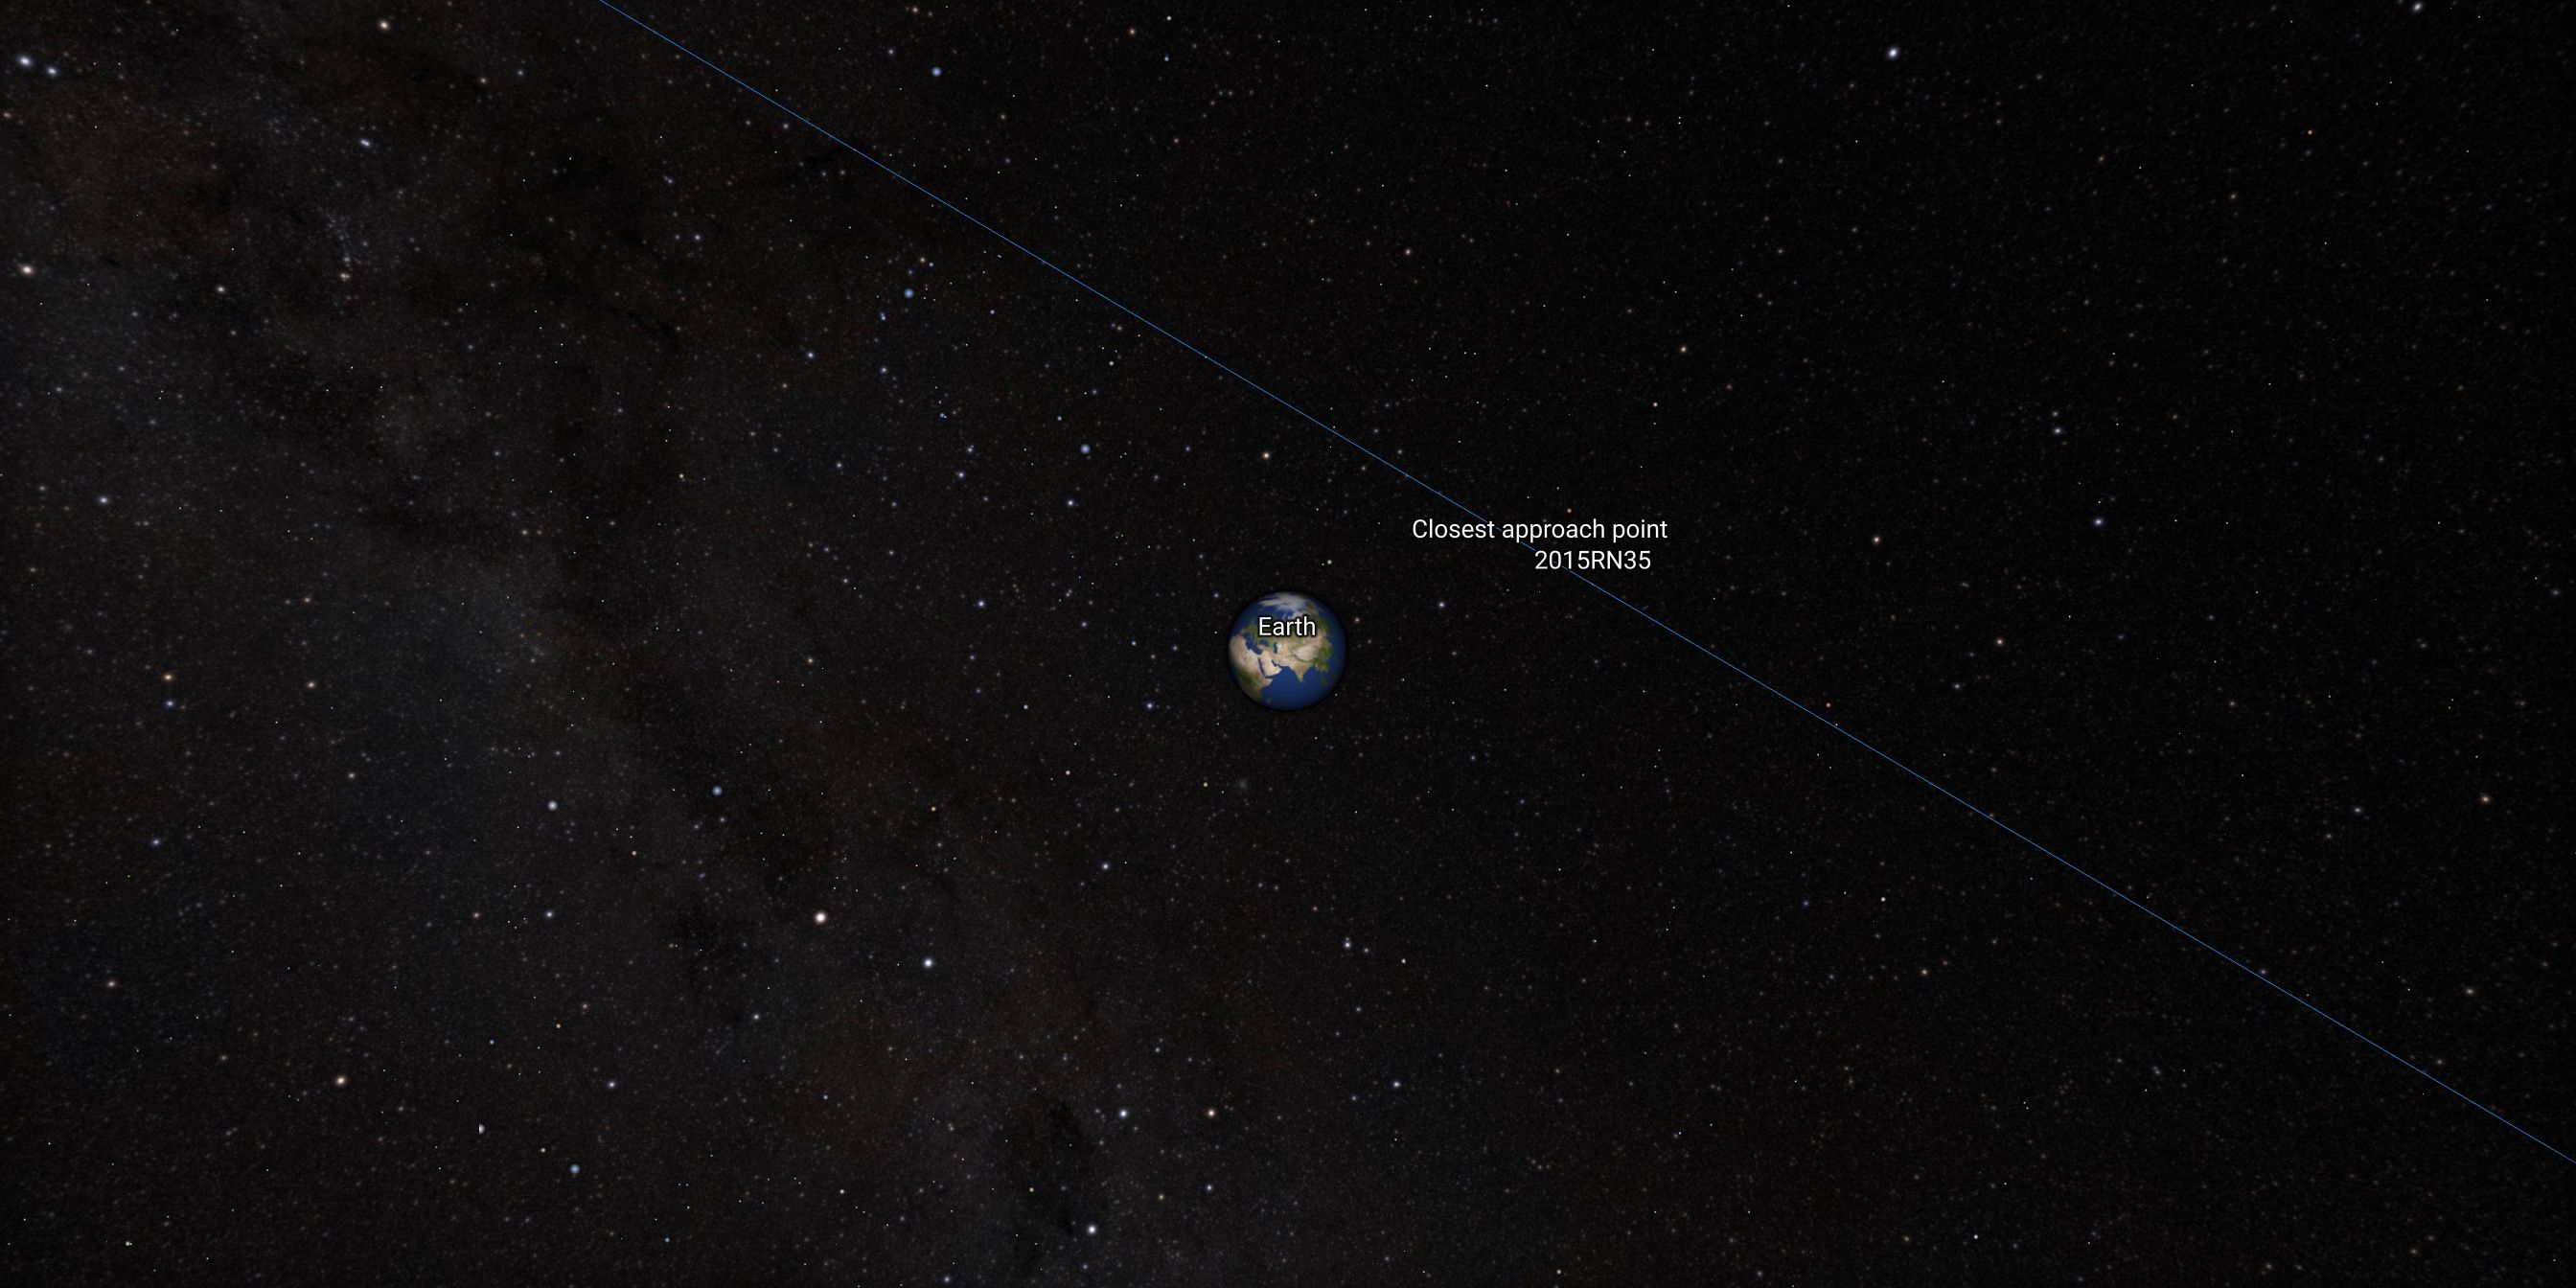 A visual simulation of asteroid 2015RN35's flyby, showing its path in space marked in blue beside a graphic of Earth, with the words 